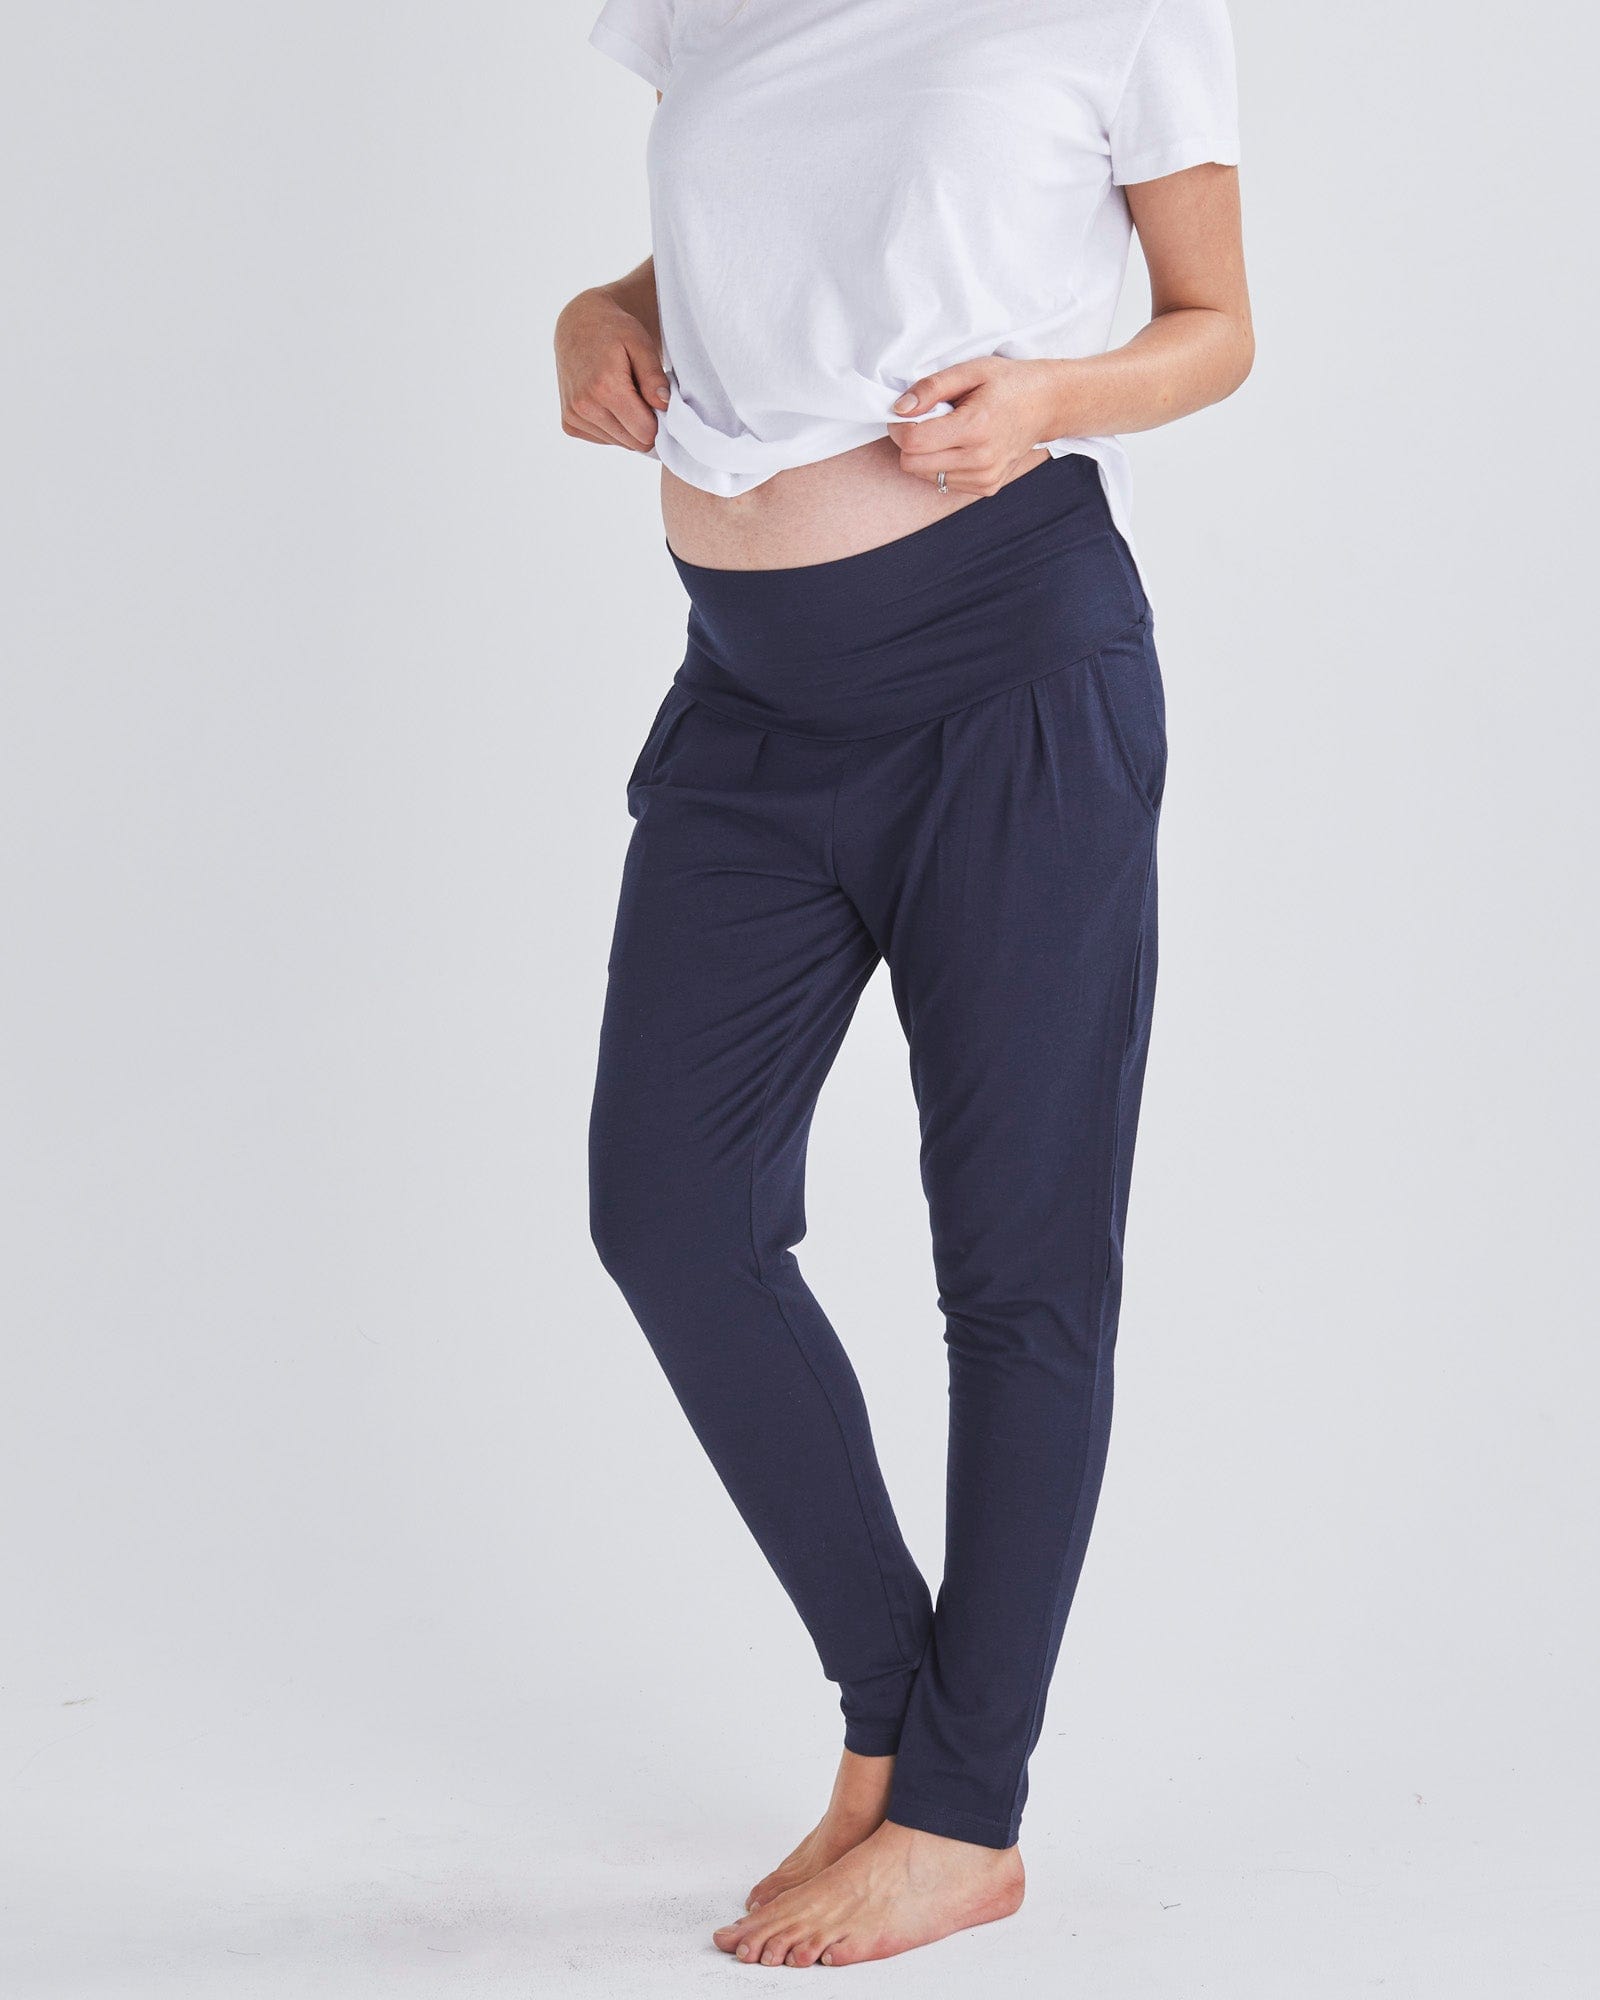 Eden  Maternity Bamboo Lounge Pants in Navy